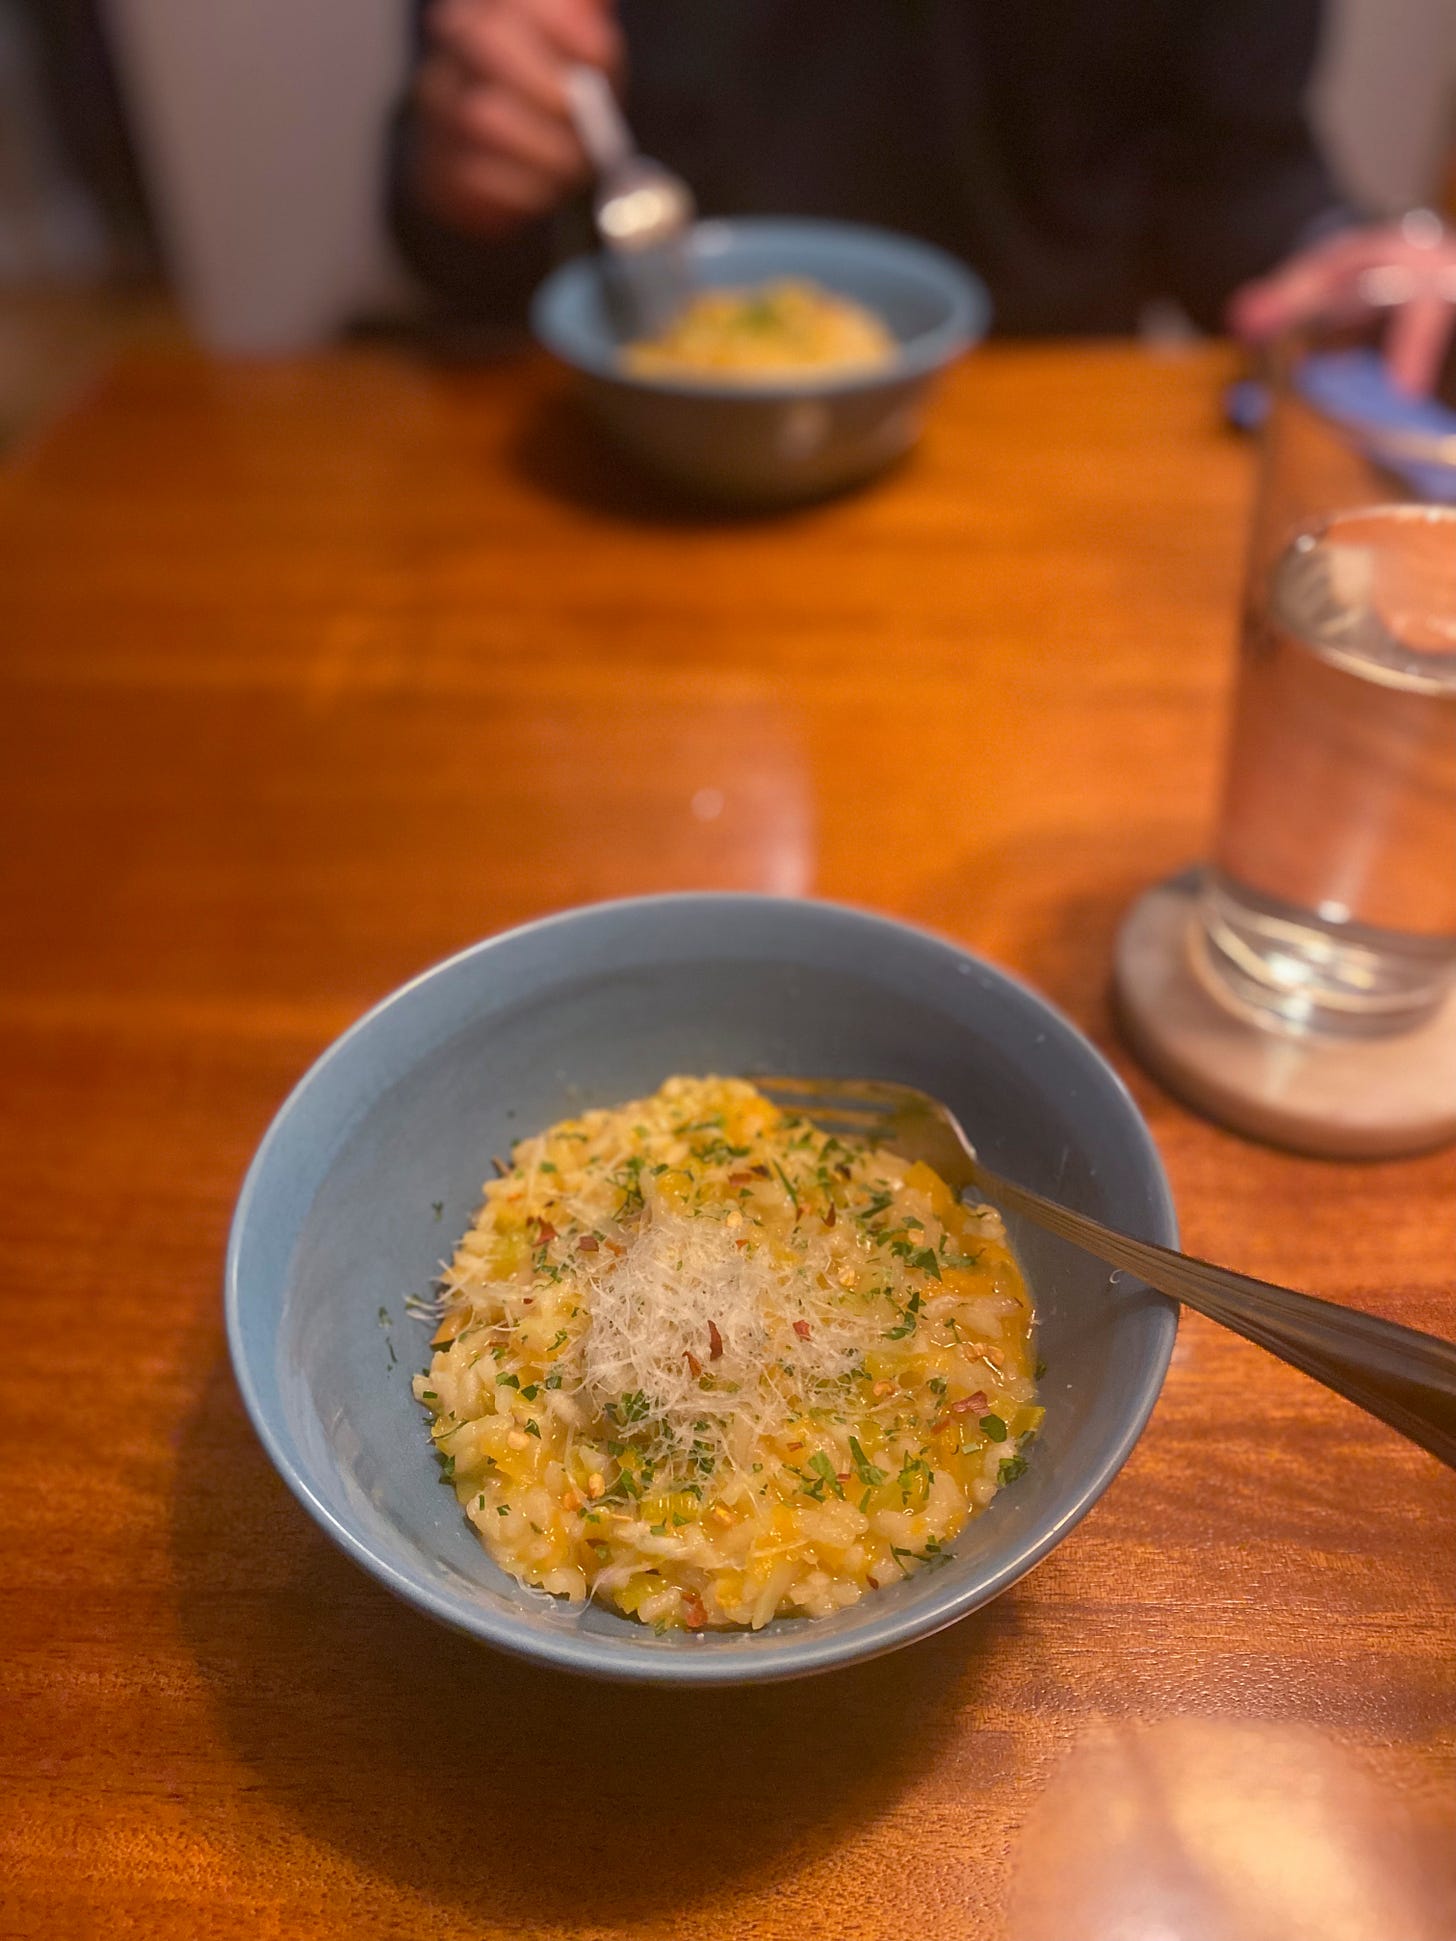 A blue bowl of the risotto described above, coloured lightly orange from the squash and dusted with parsley, chili flakes, and a little pile of grated parmesan. Jeff's fork is poised over his bowl in the background.